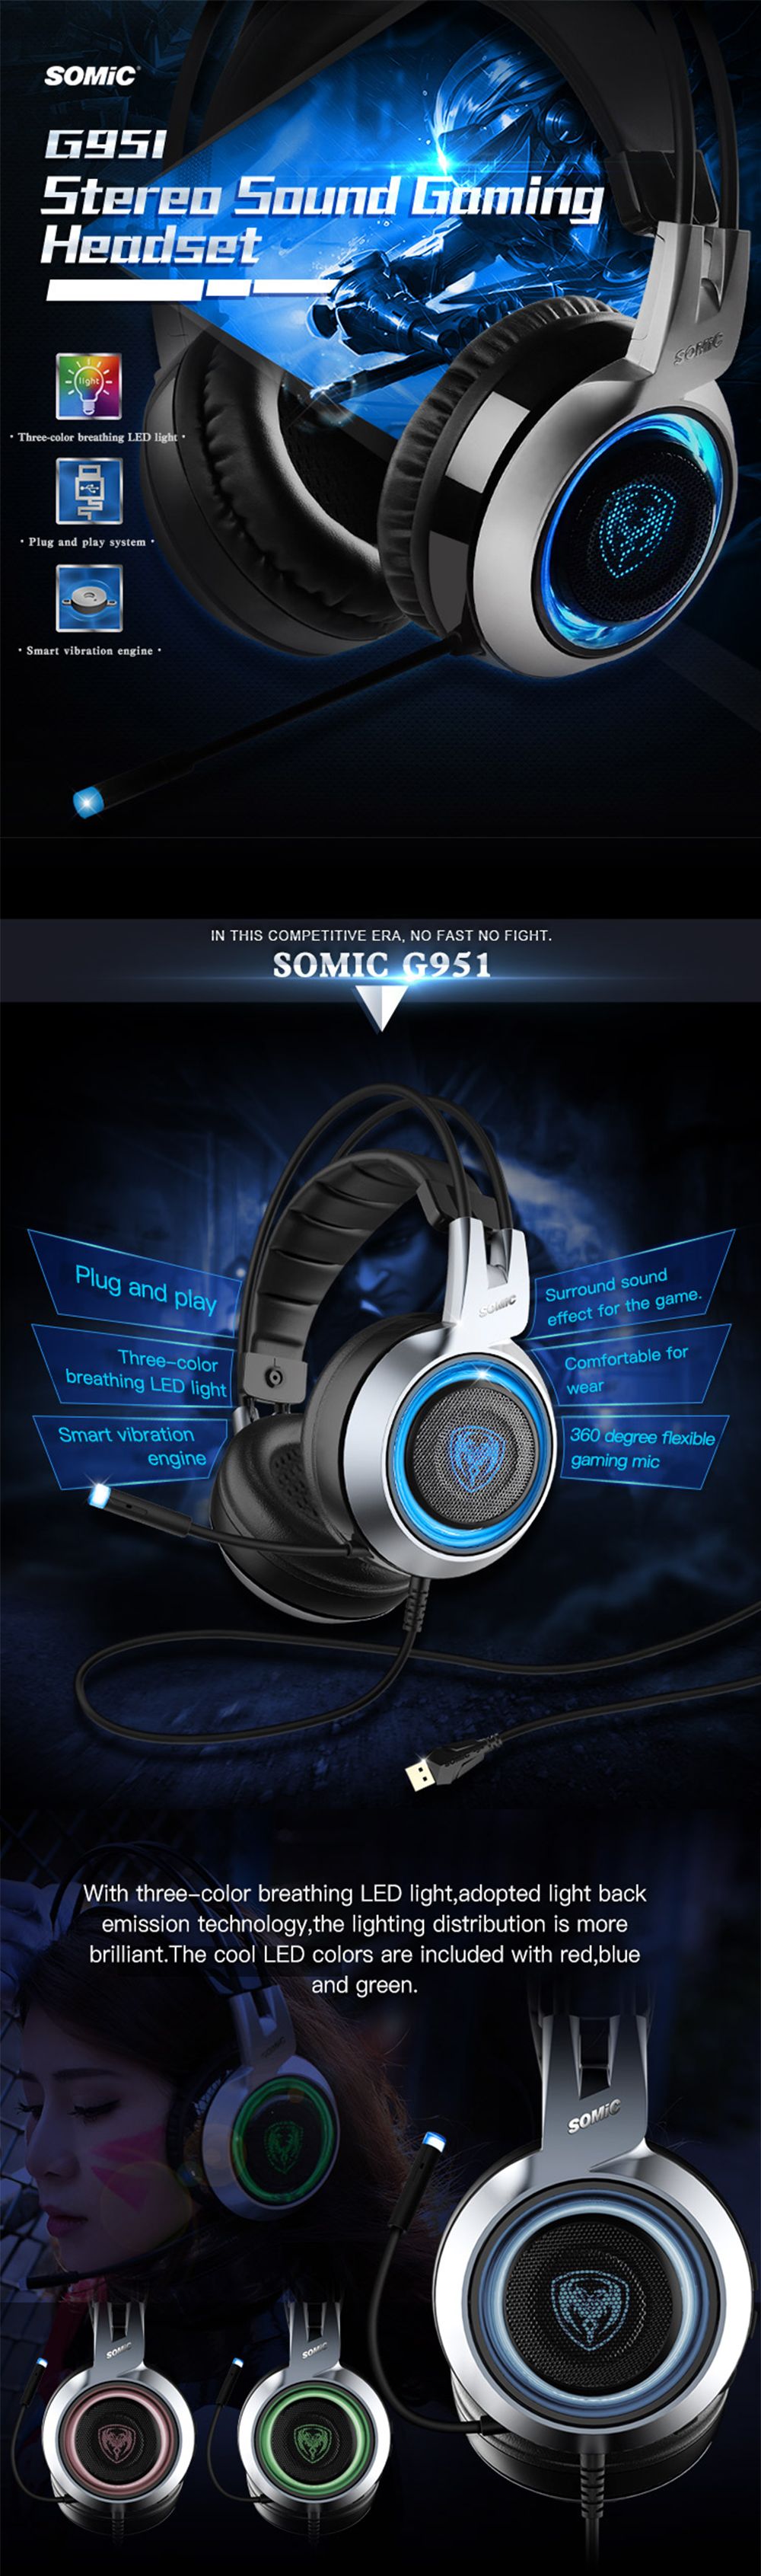 SOMiC-G951-USB-Gaming-Headphone-Breathing-LED-Backlight-with-Three-Colors-Headset-With-Microphone-fo-1560723